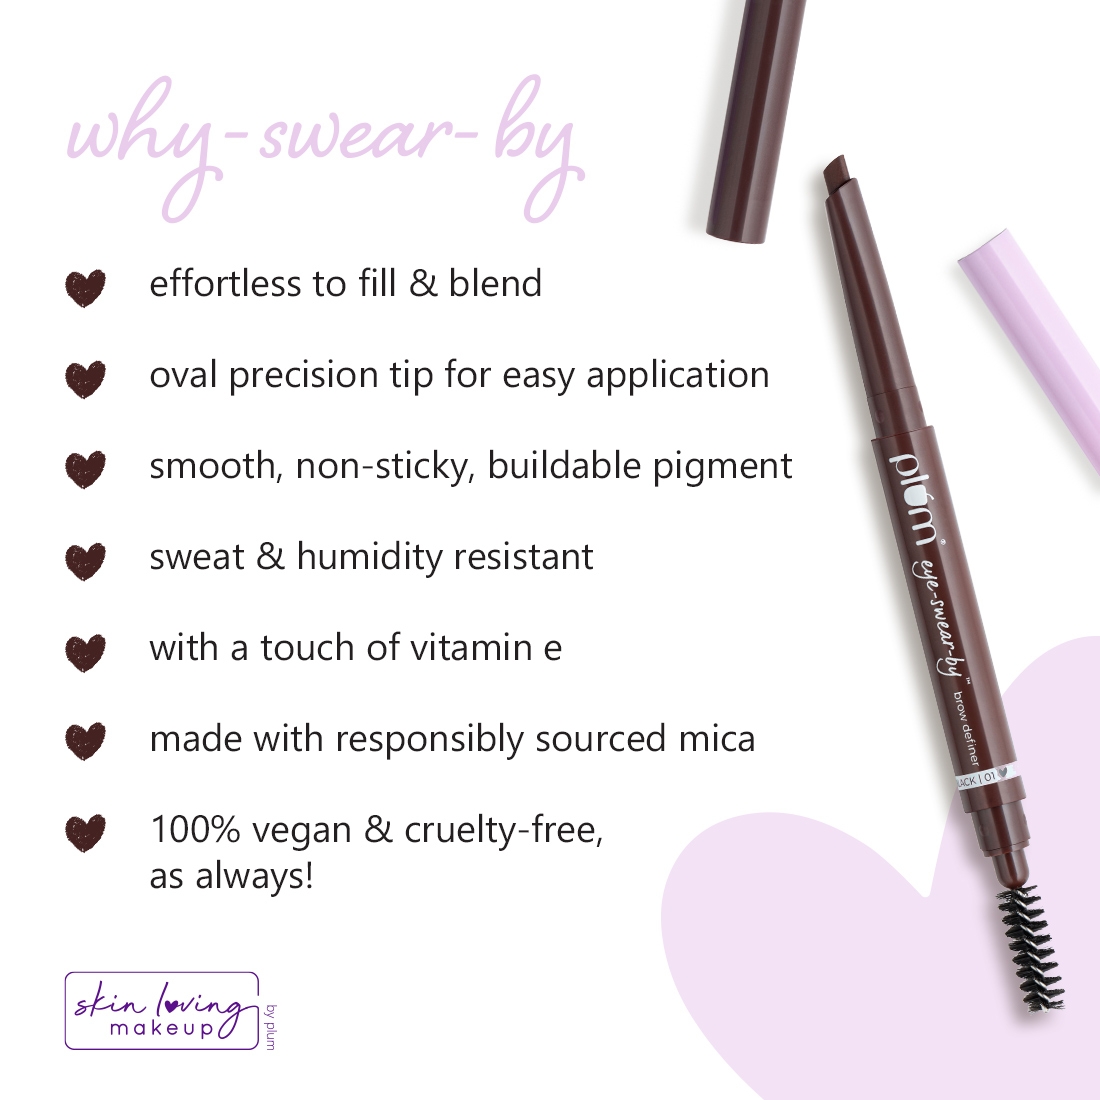 plum be good | Plum Eye-Swear-By Brow Definer - Ash Black | Buildable Pigment | With Vitamin E | 100% Vegan & Cruelty Free 1